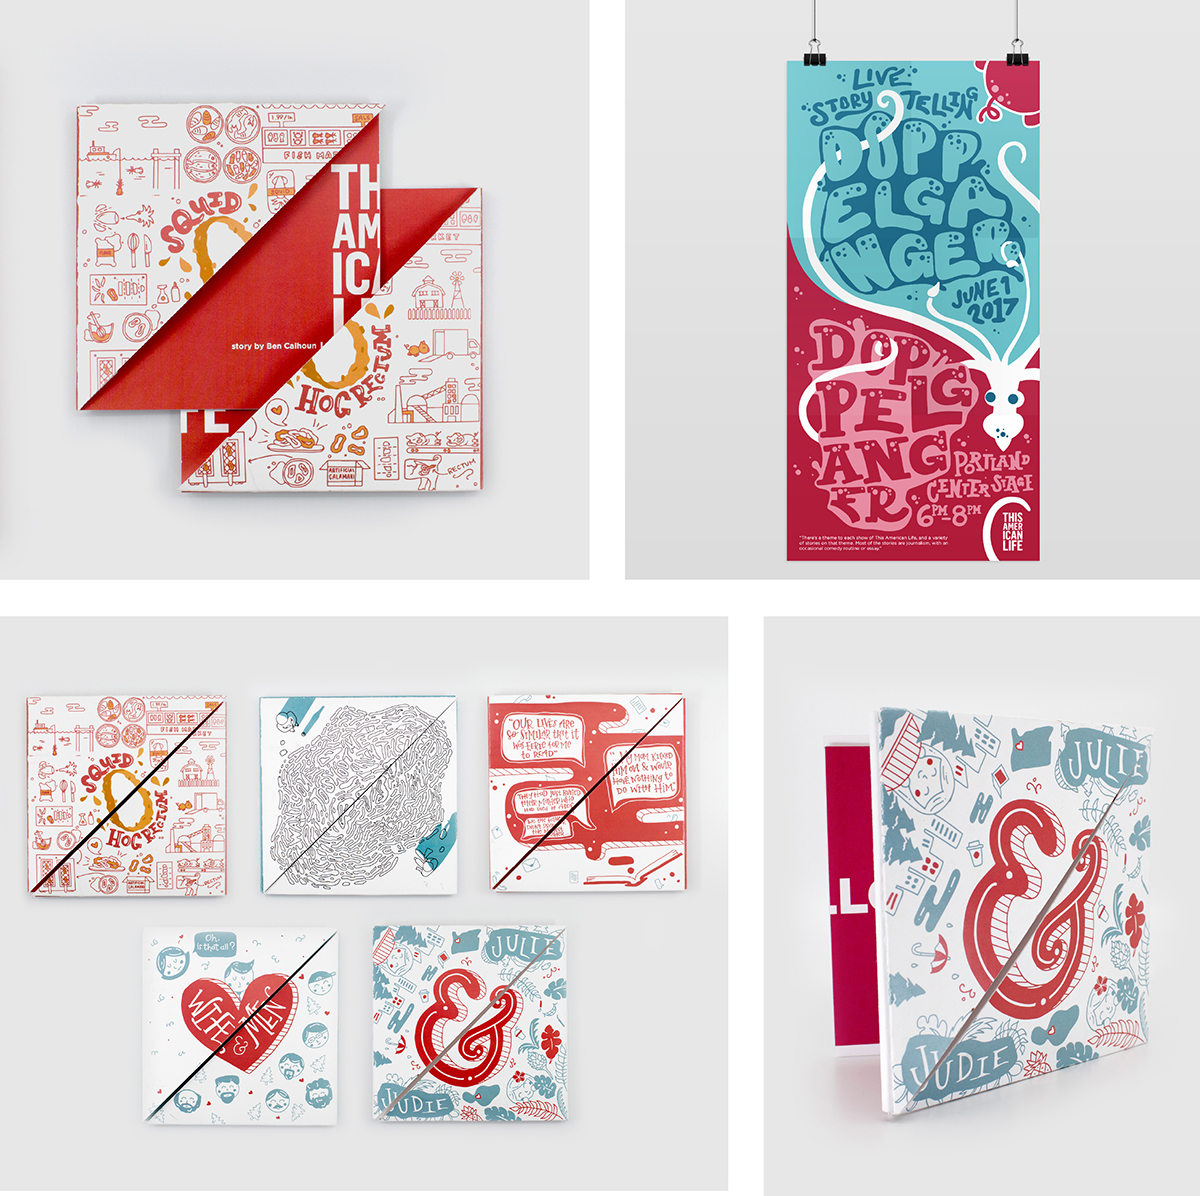 4 different images in a grid, detailing folded CD packaging that assembles together from two triangle shapes. Teal, red, and white lettering has a mix of styles, including bubble letters, expressive hand lettering. Fun and playful style.